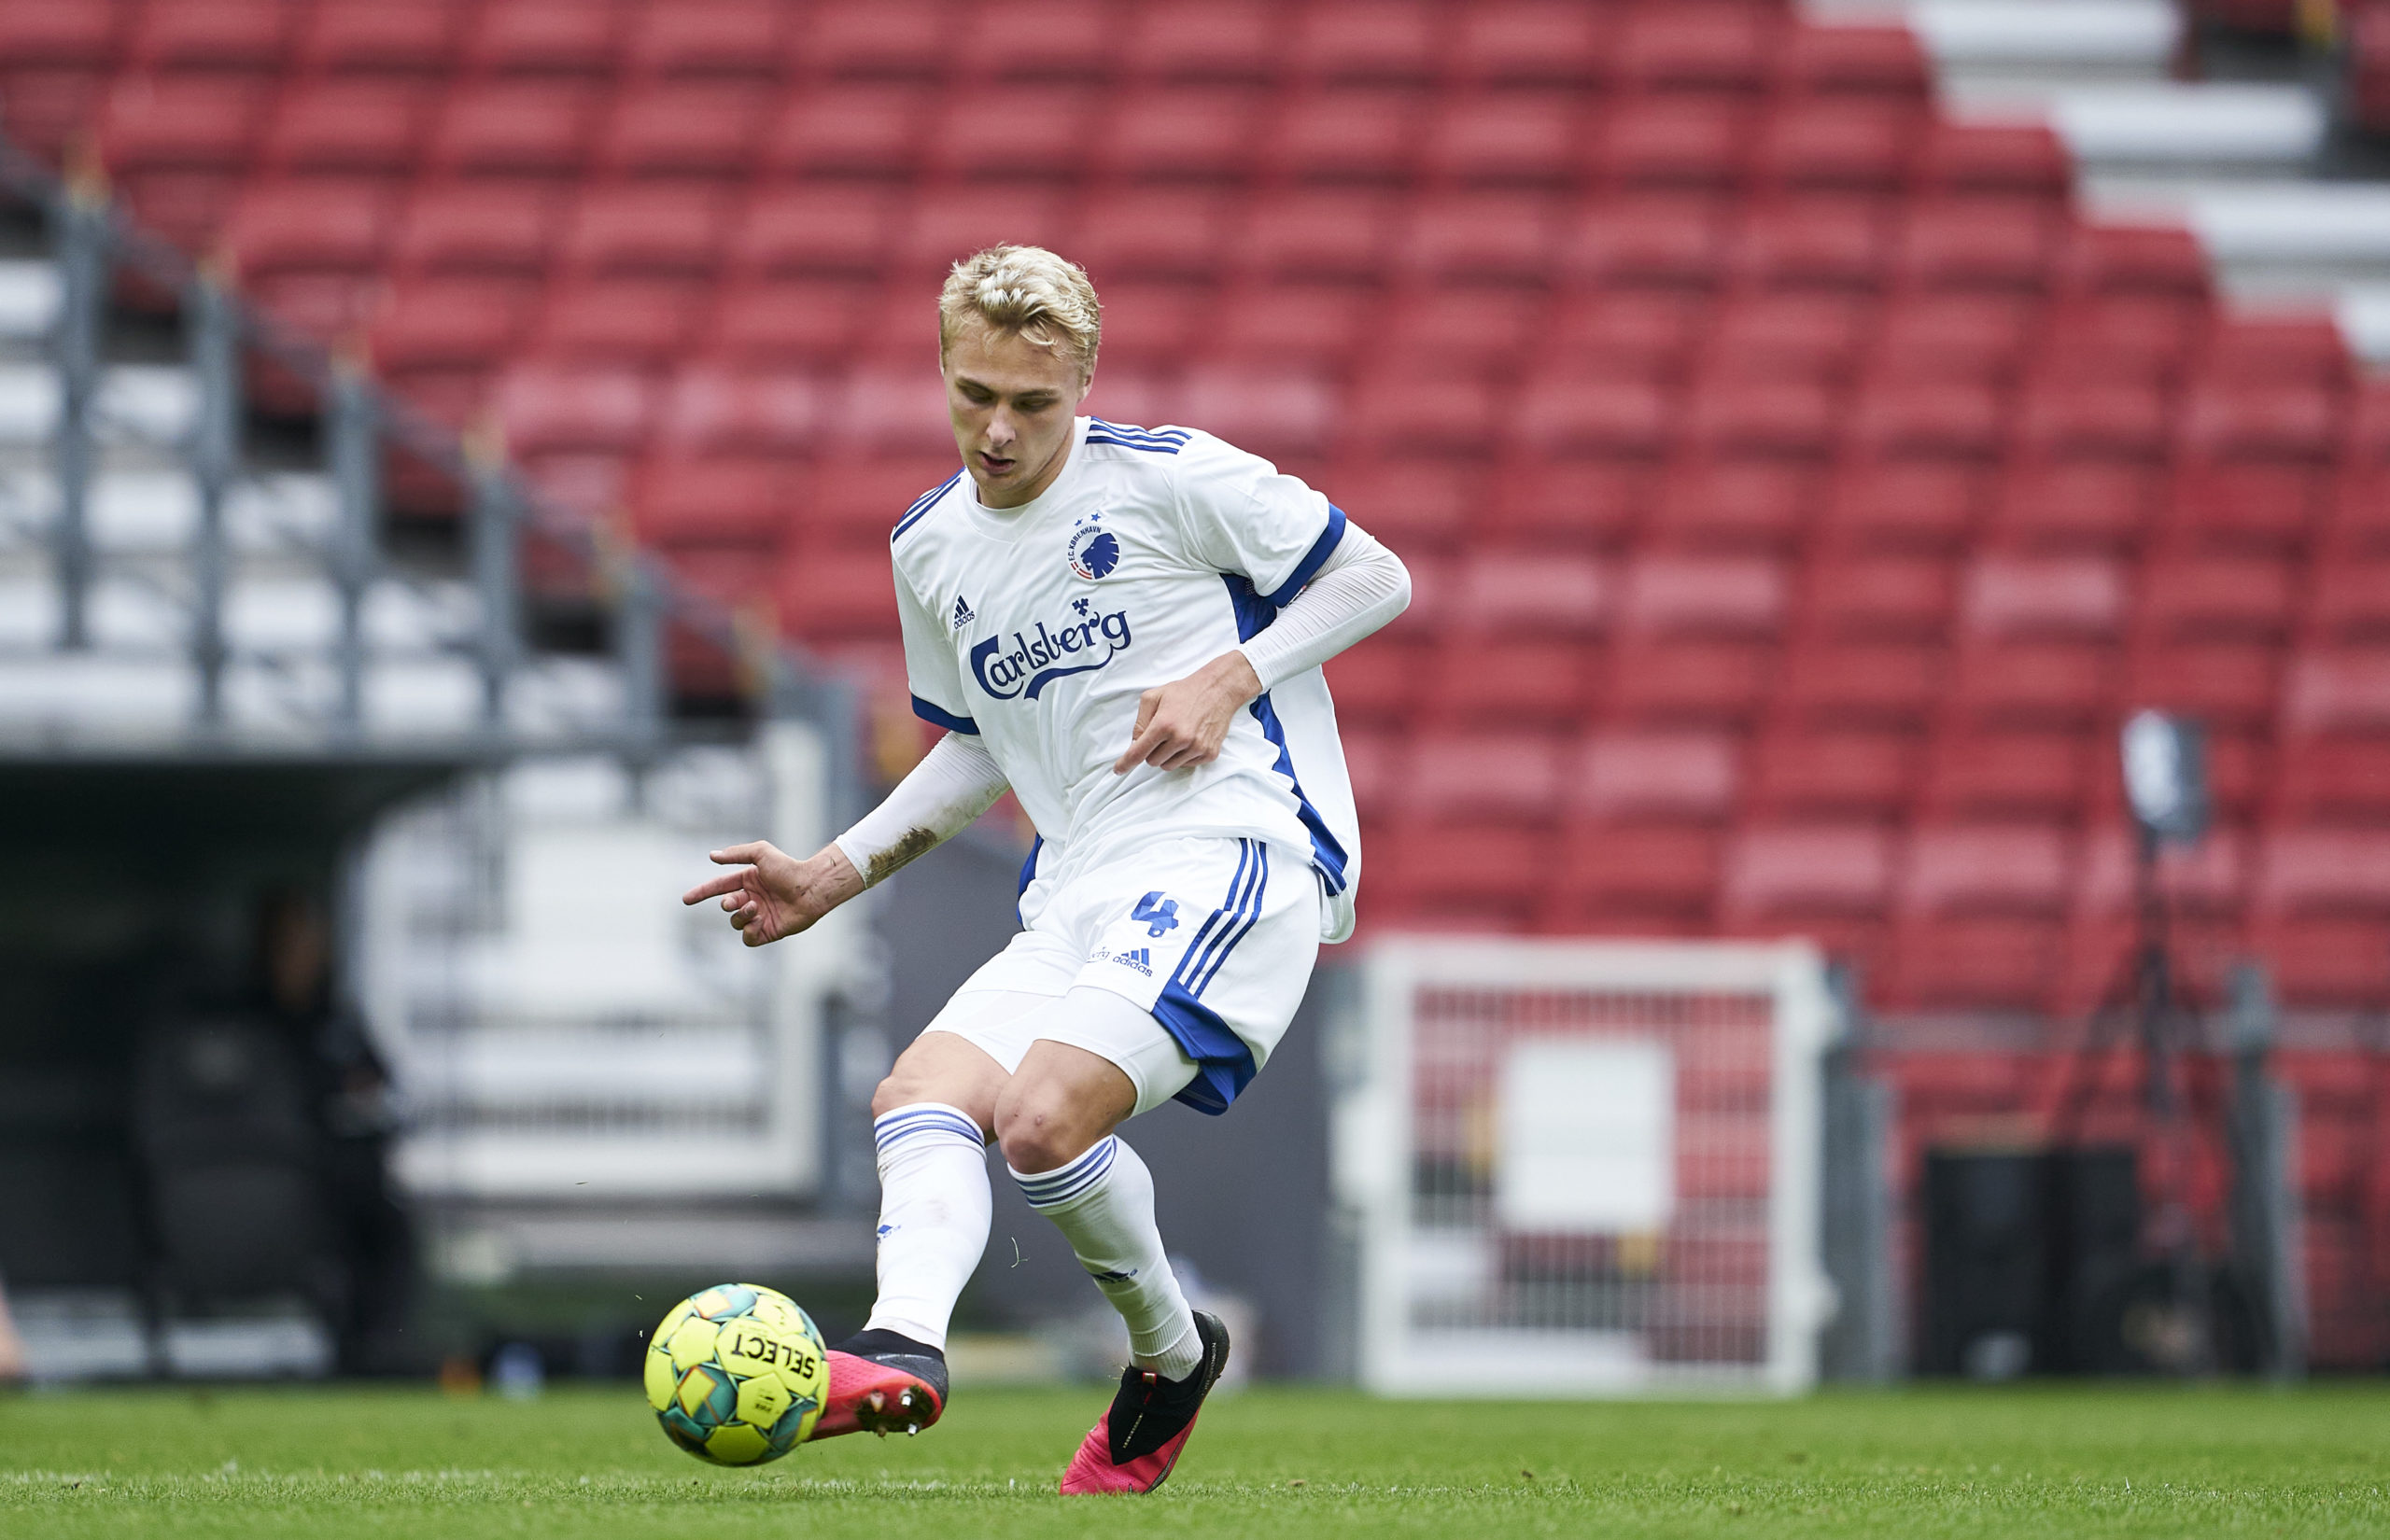 Danish expert believes reported Celtic target Victor Nelsson can be signed for £8.5m